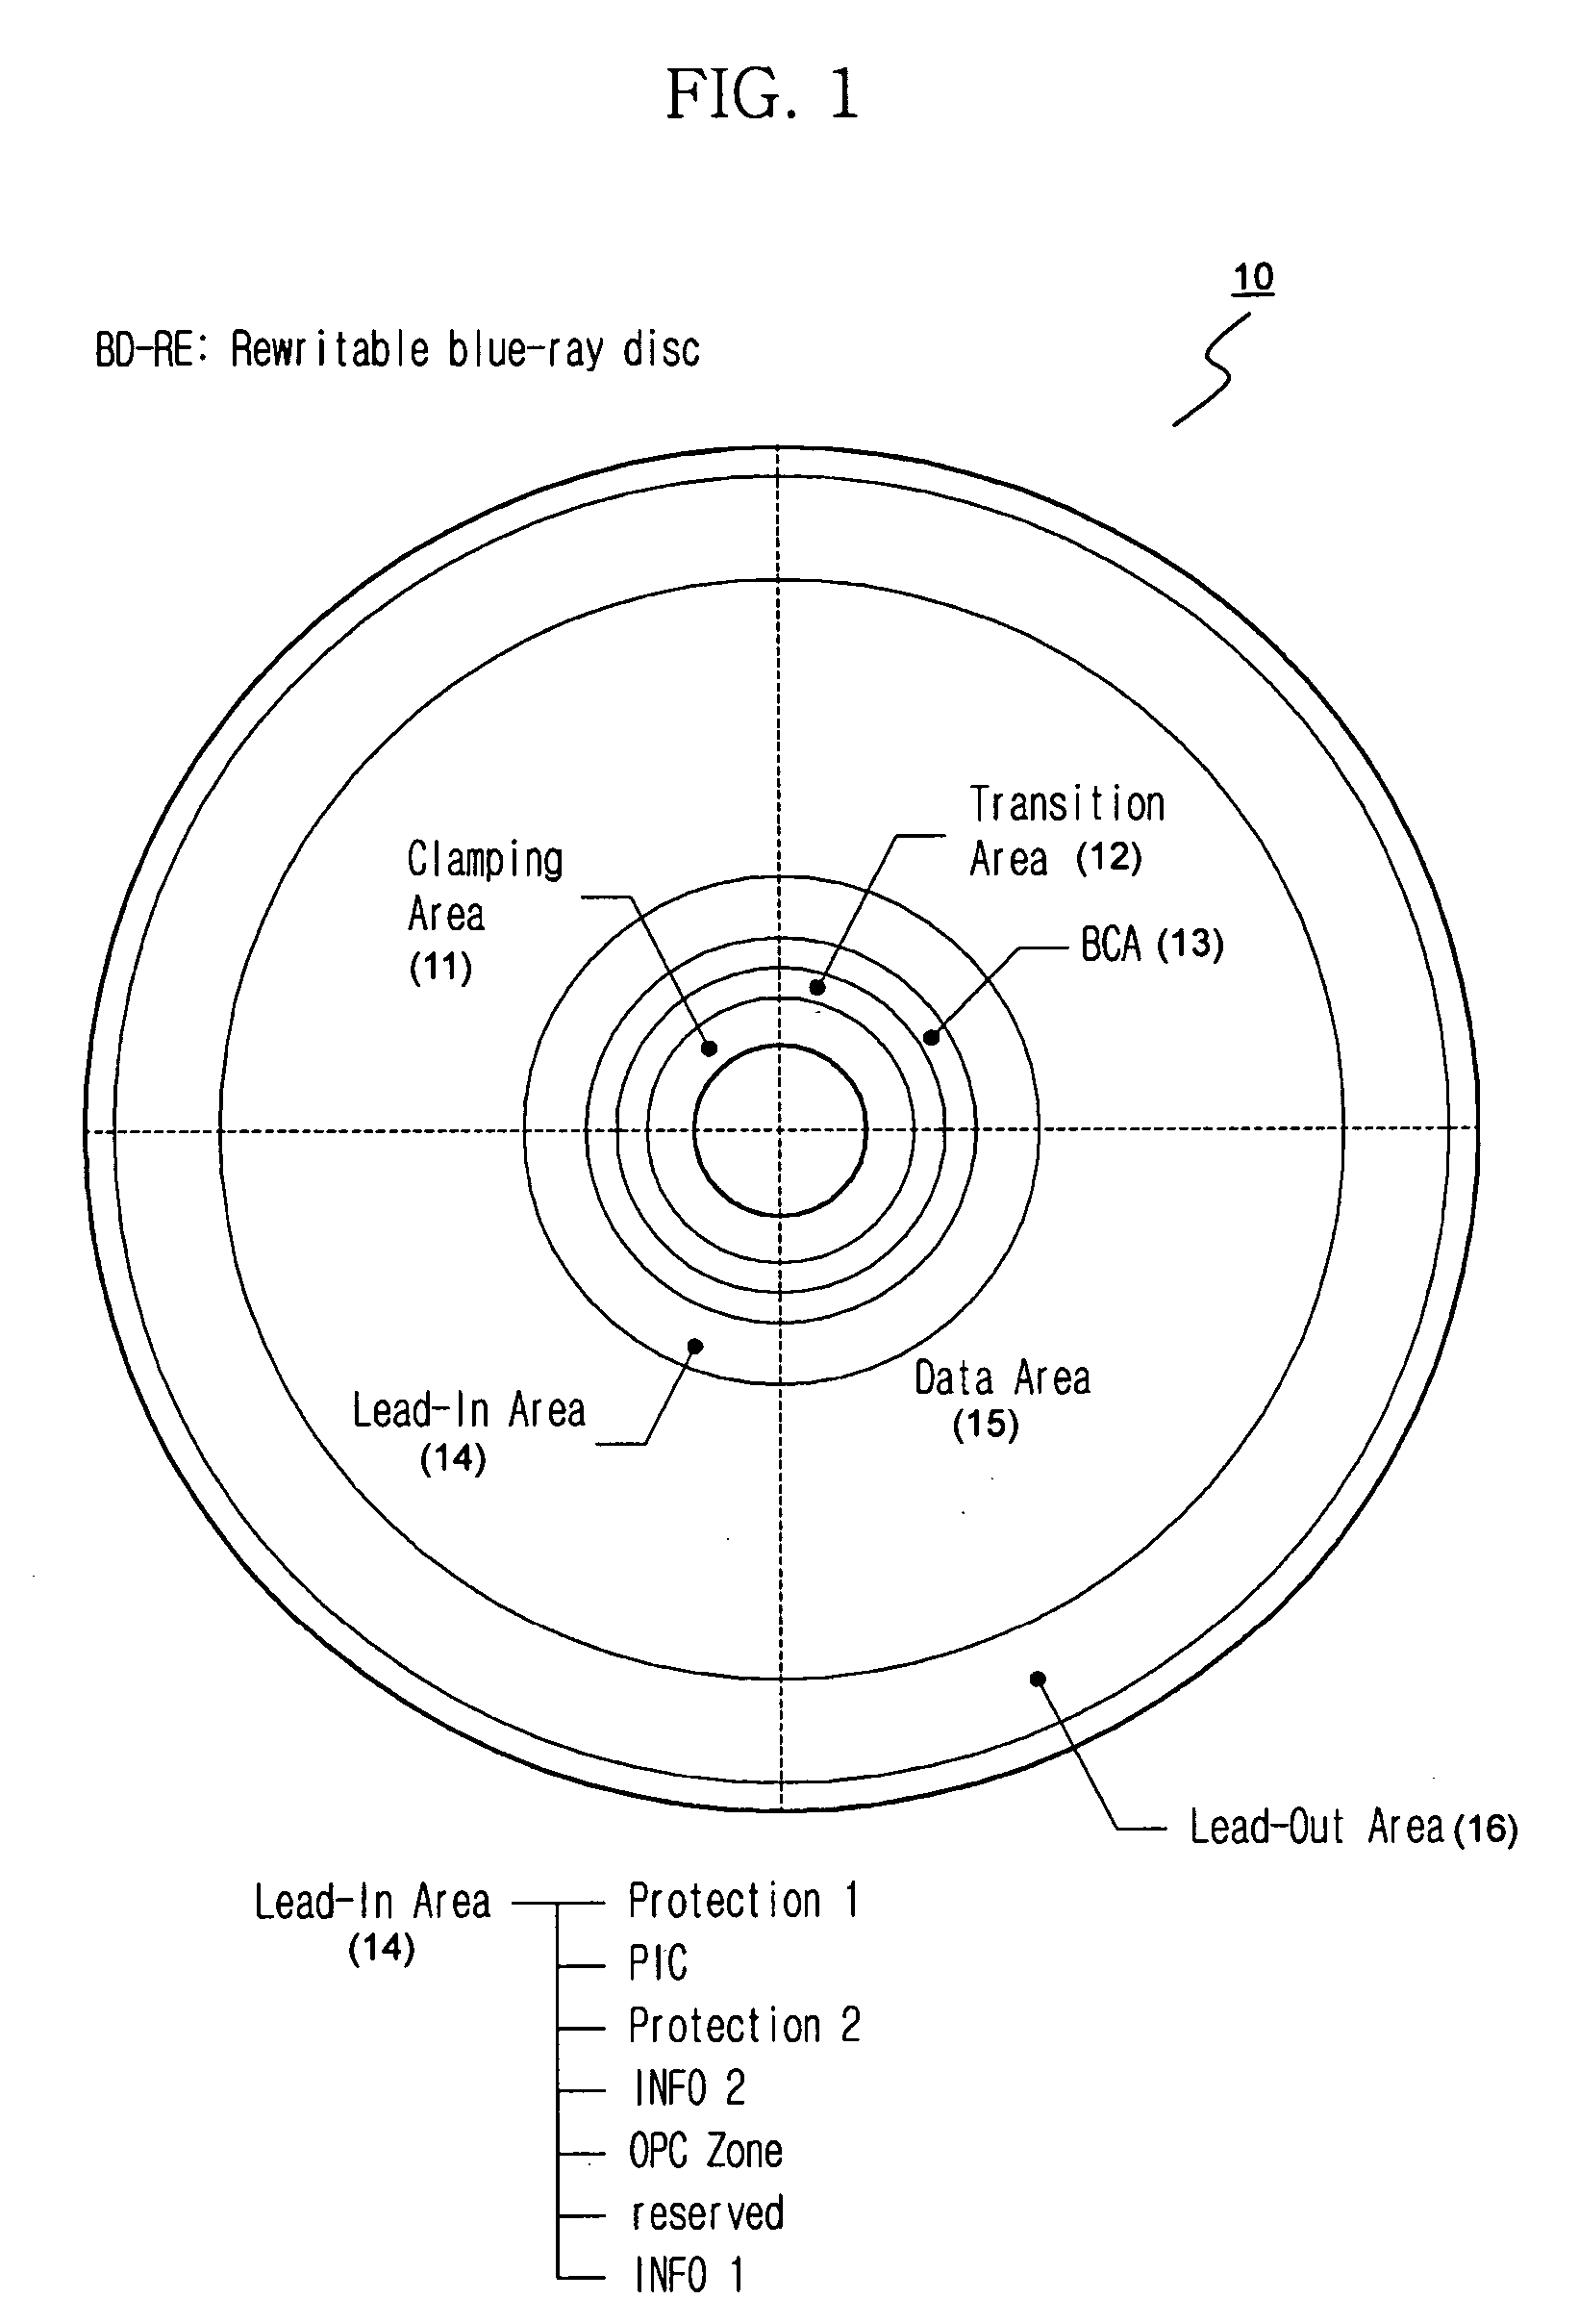 Optical recording medium, recording/reproducing apparatus provided with optimum power control (OPC), and method for controlling the same